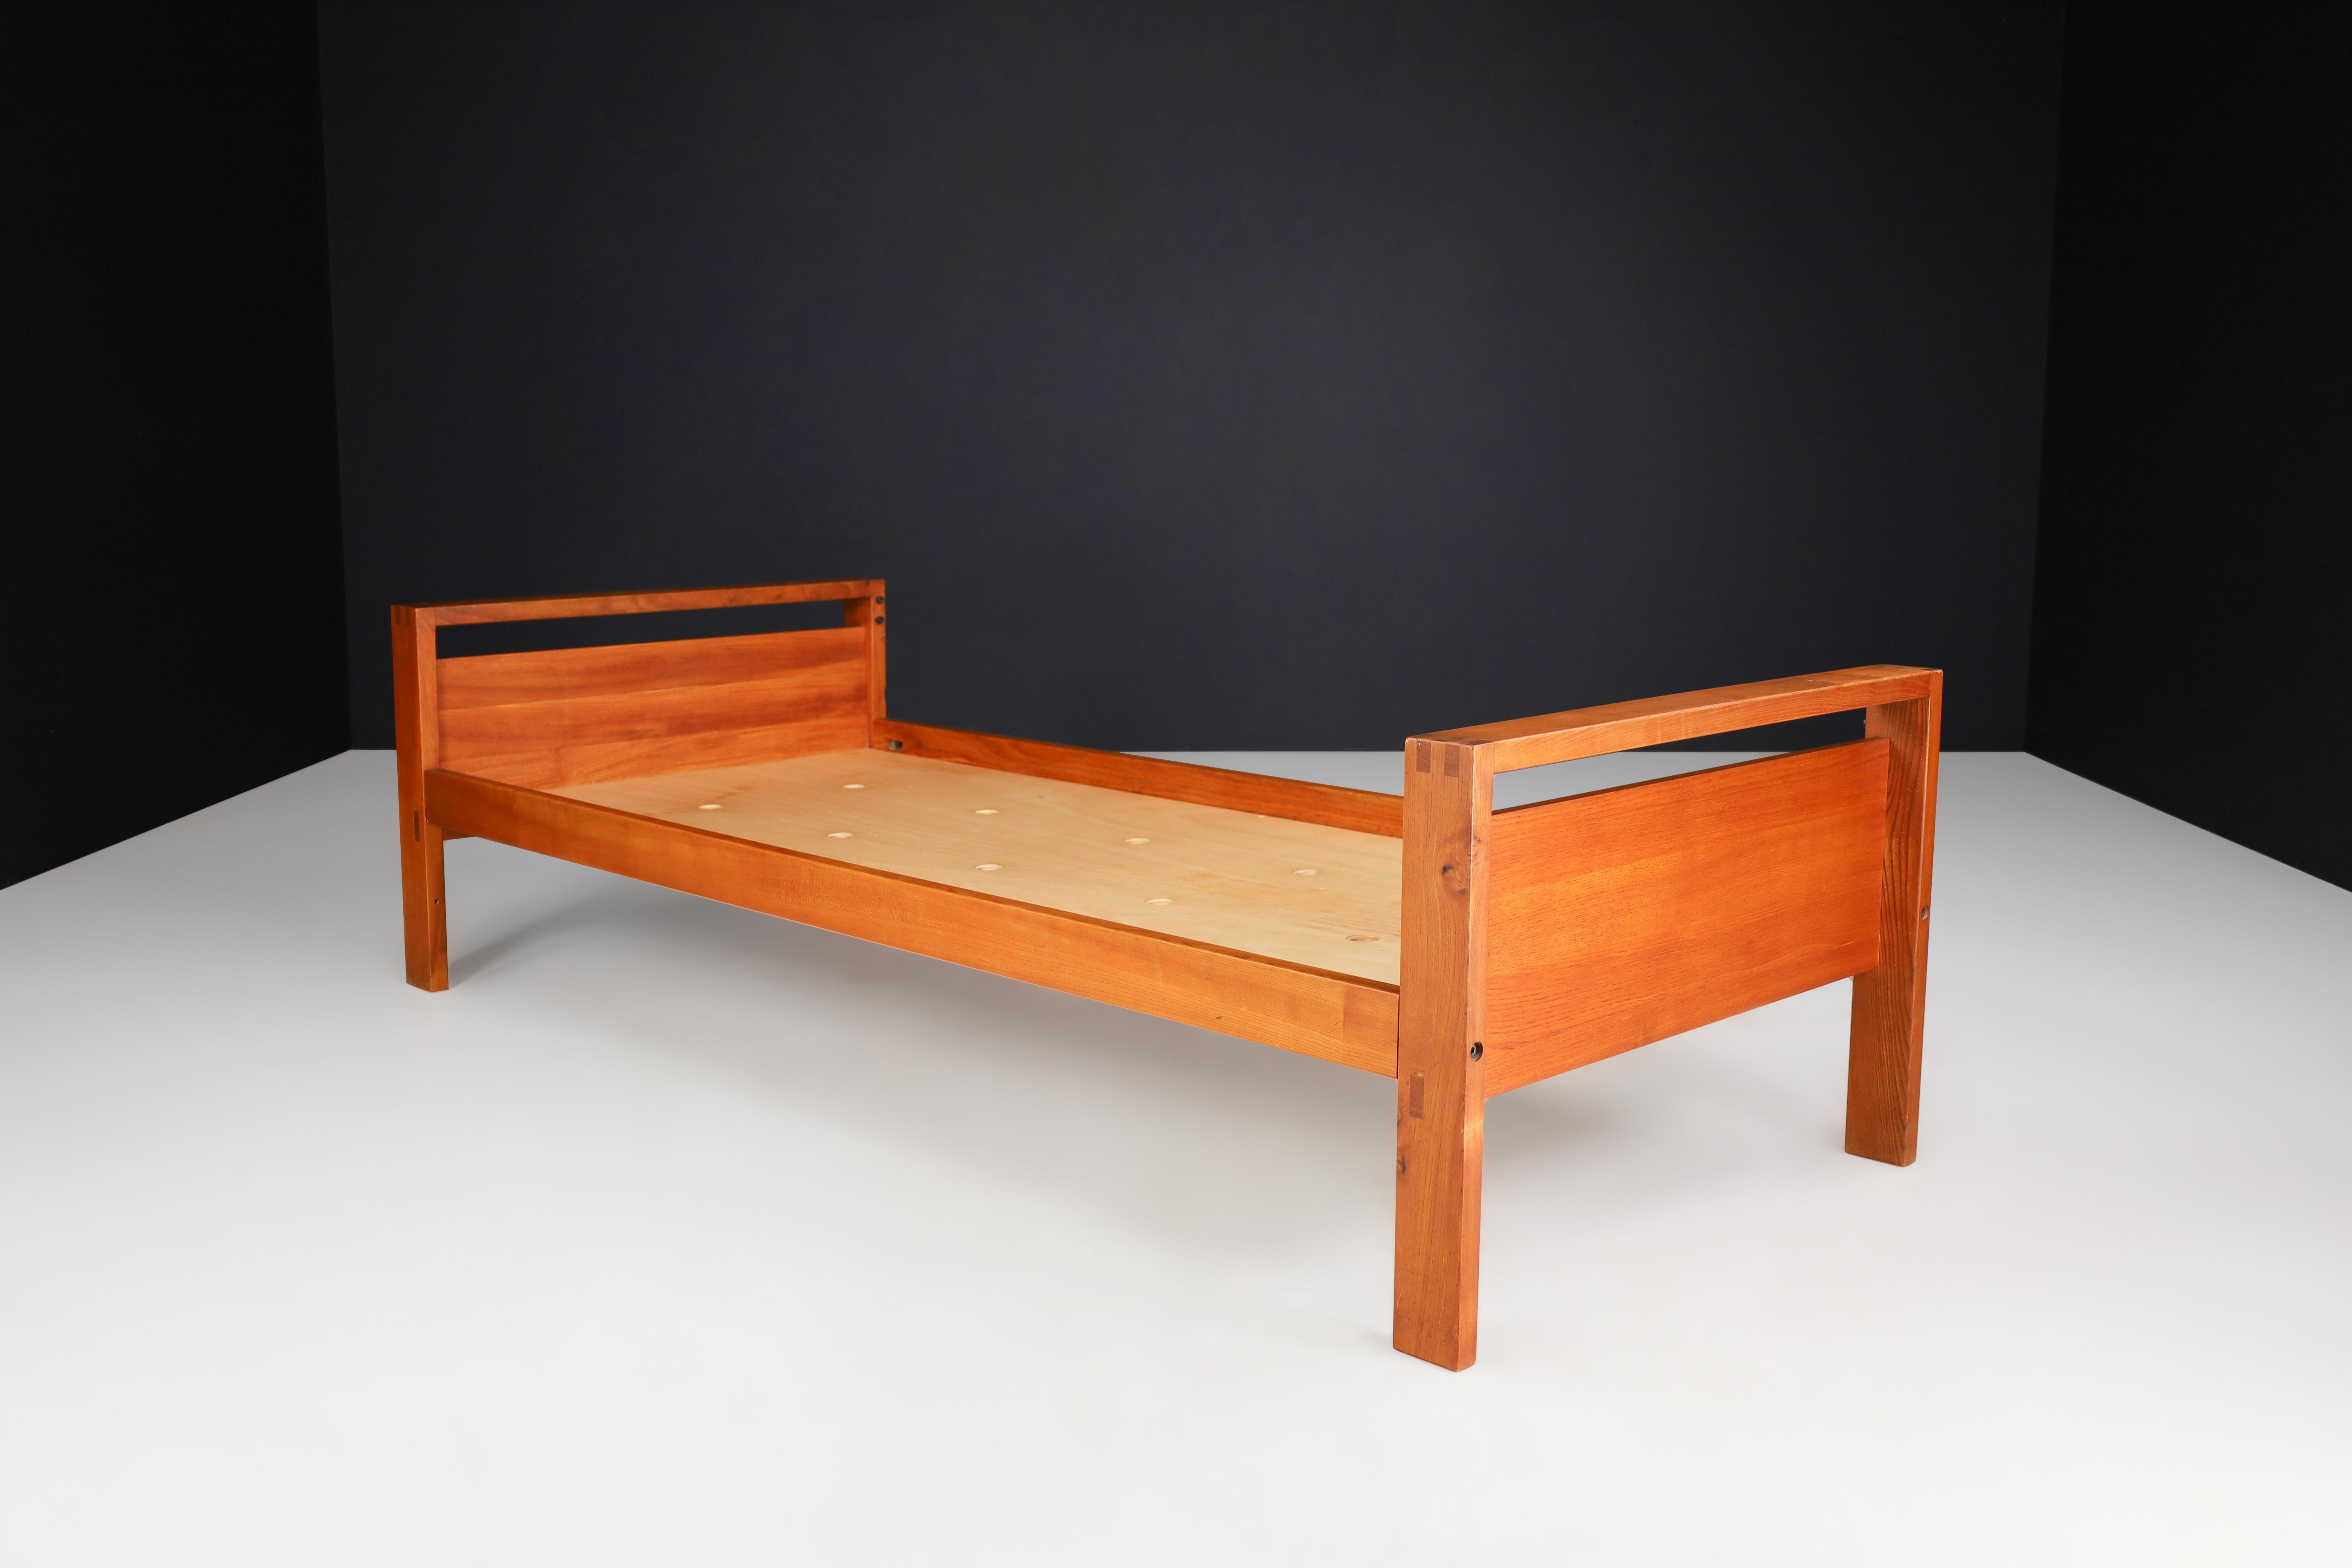 Midcentury Pierre Chapo Lo6a Bed, Daybed in Solid Elm Wood, France, 1960s For Sale 1